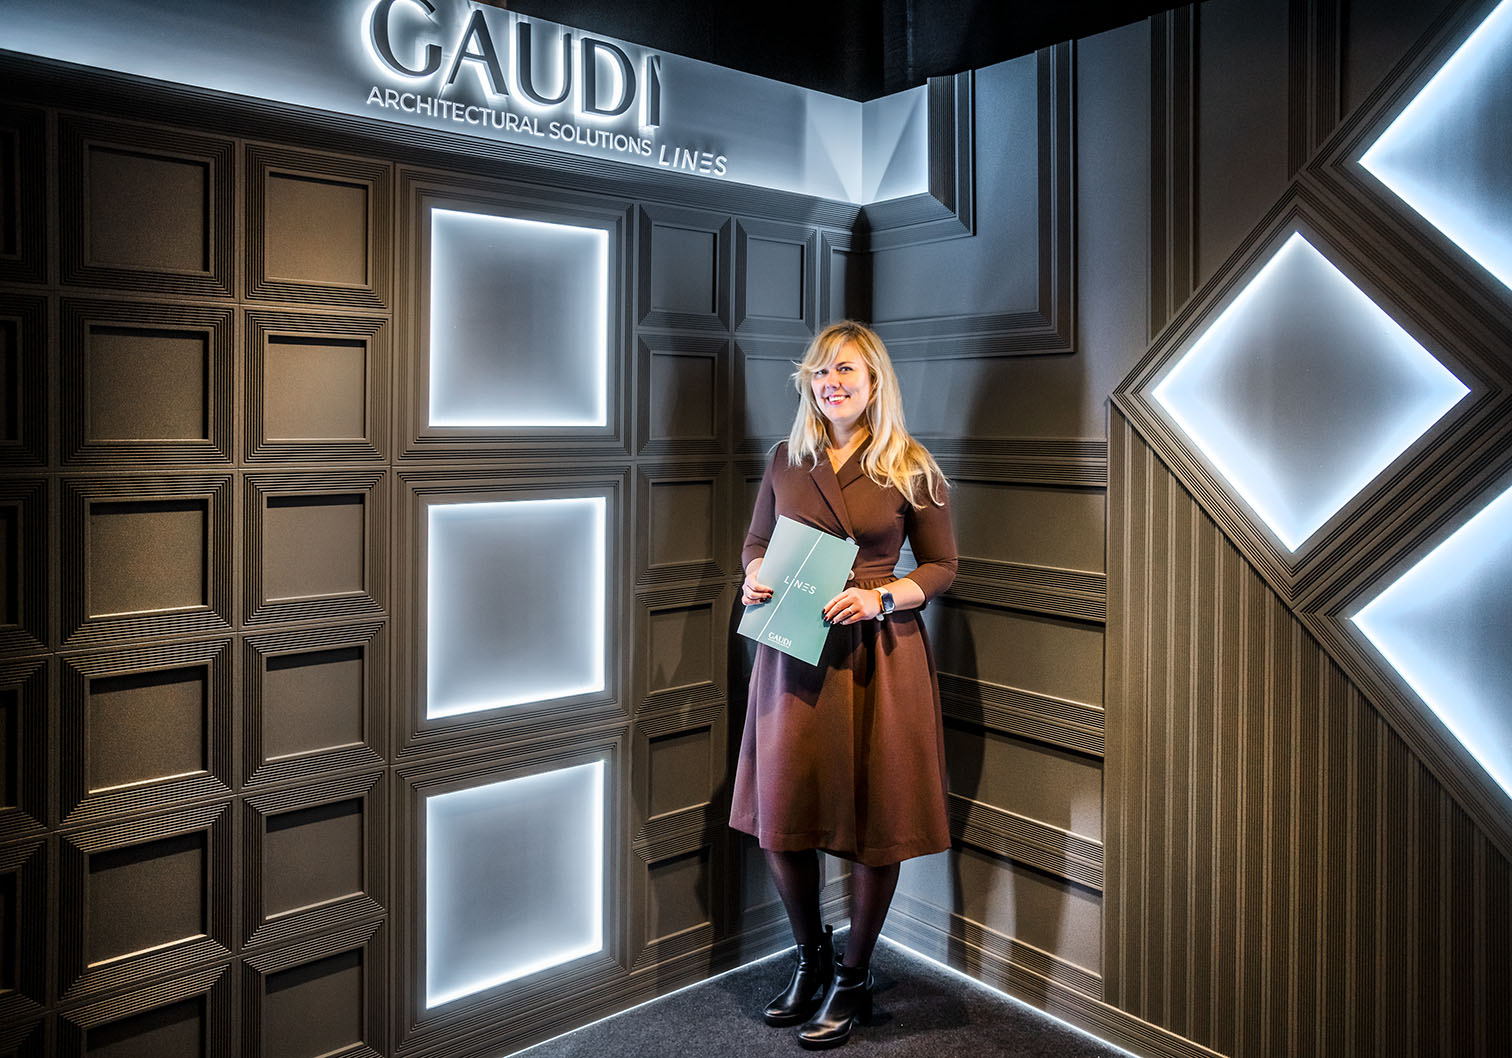 Gaudi brand at the ARCHITECT @ WORK exhibition in Germany